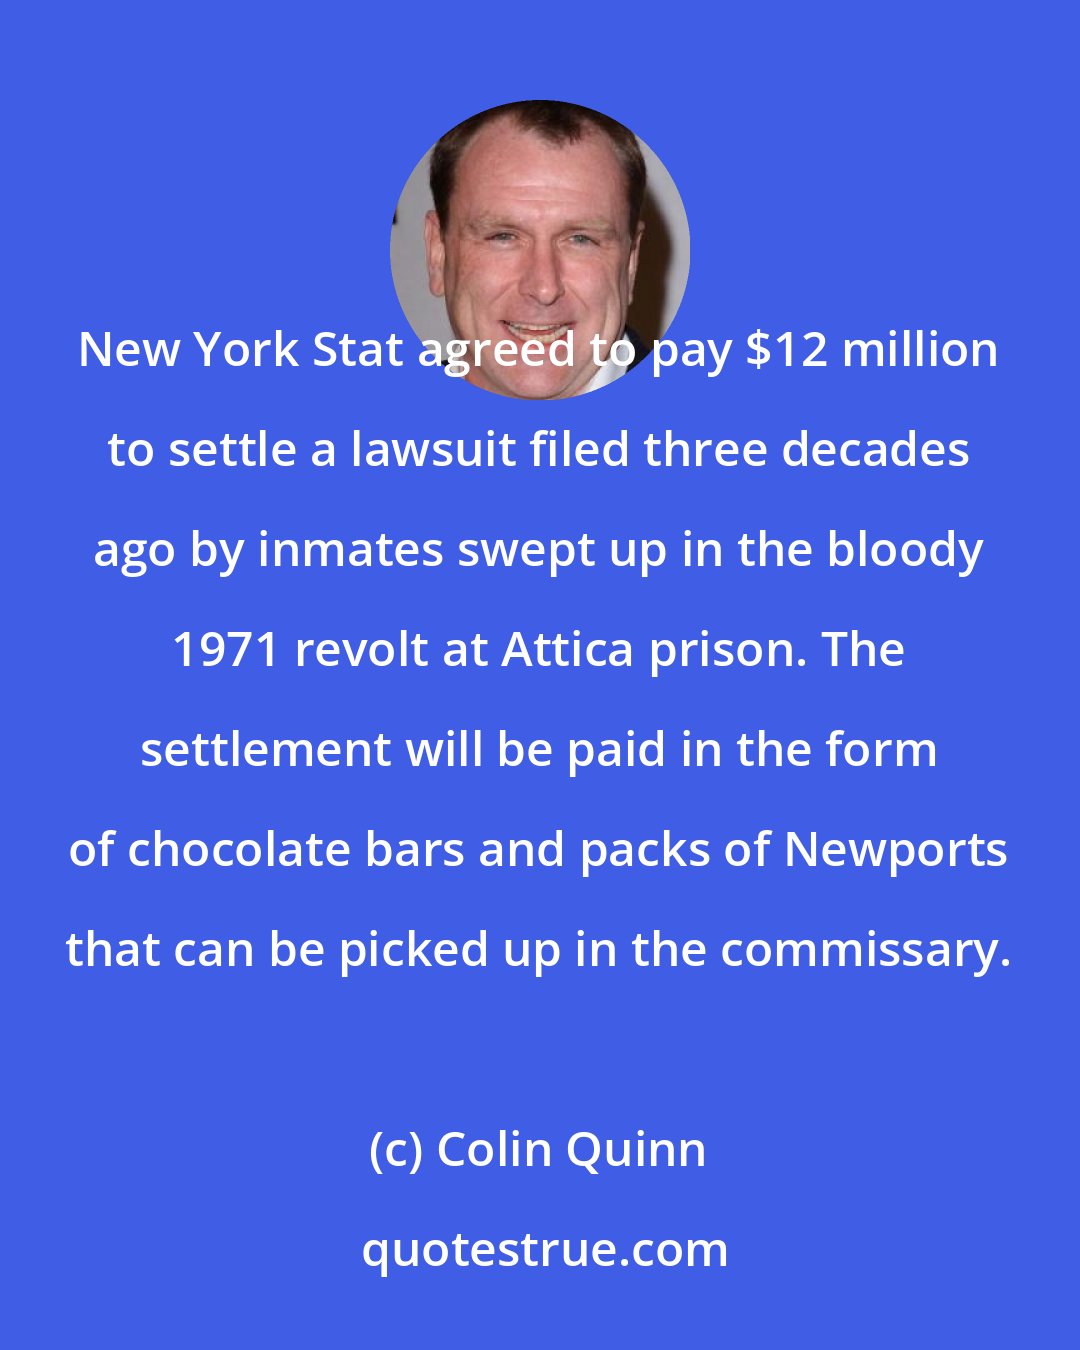 Colin Quinn: New York Stat agreed to pay $12 million to settle a lawsuit filed three decades ago by inmates swept up in the bloody 1971 revolt at Attica prison. The settlement will be paid in the form of chocolate bars and packs of Newports that can be picked up in the commissary.